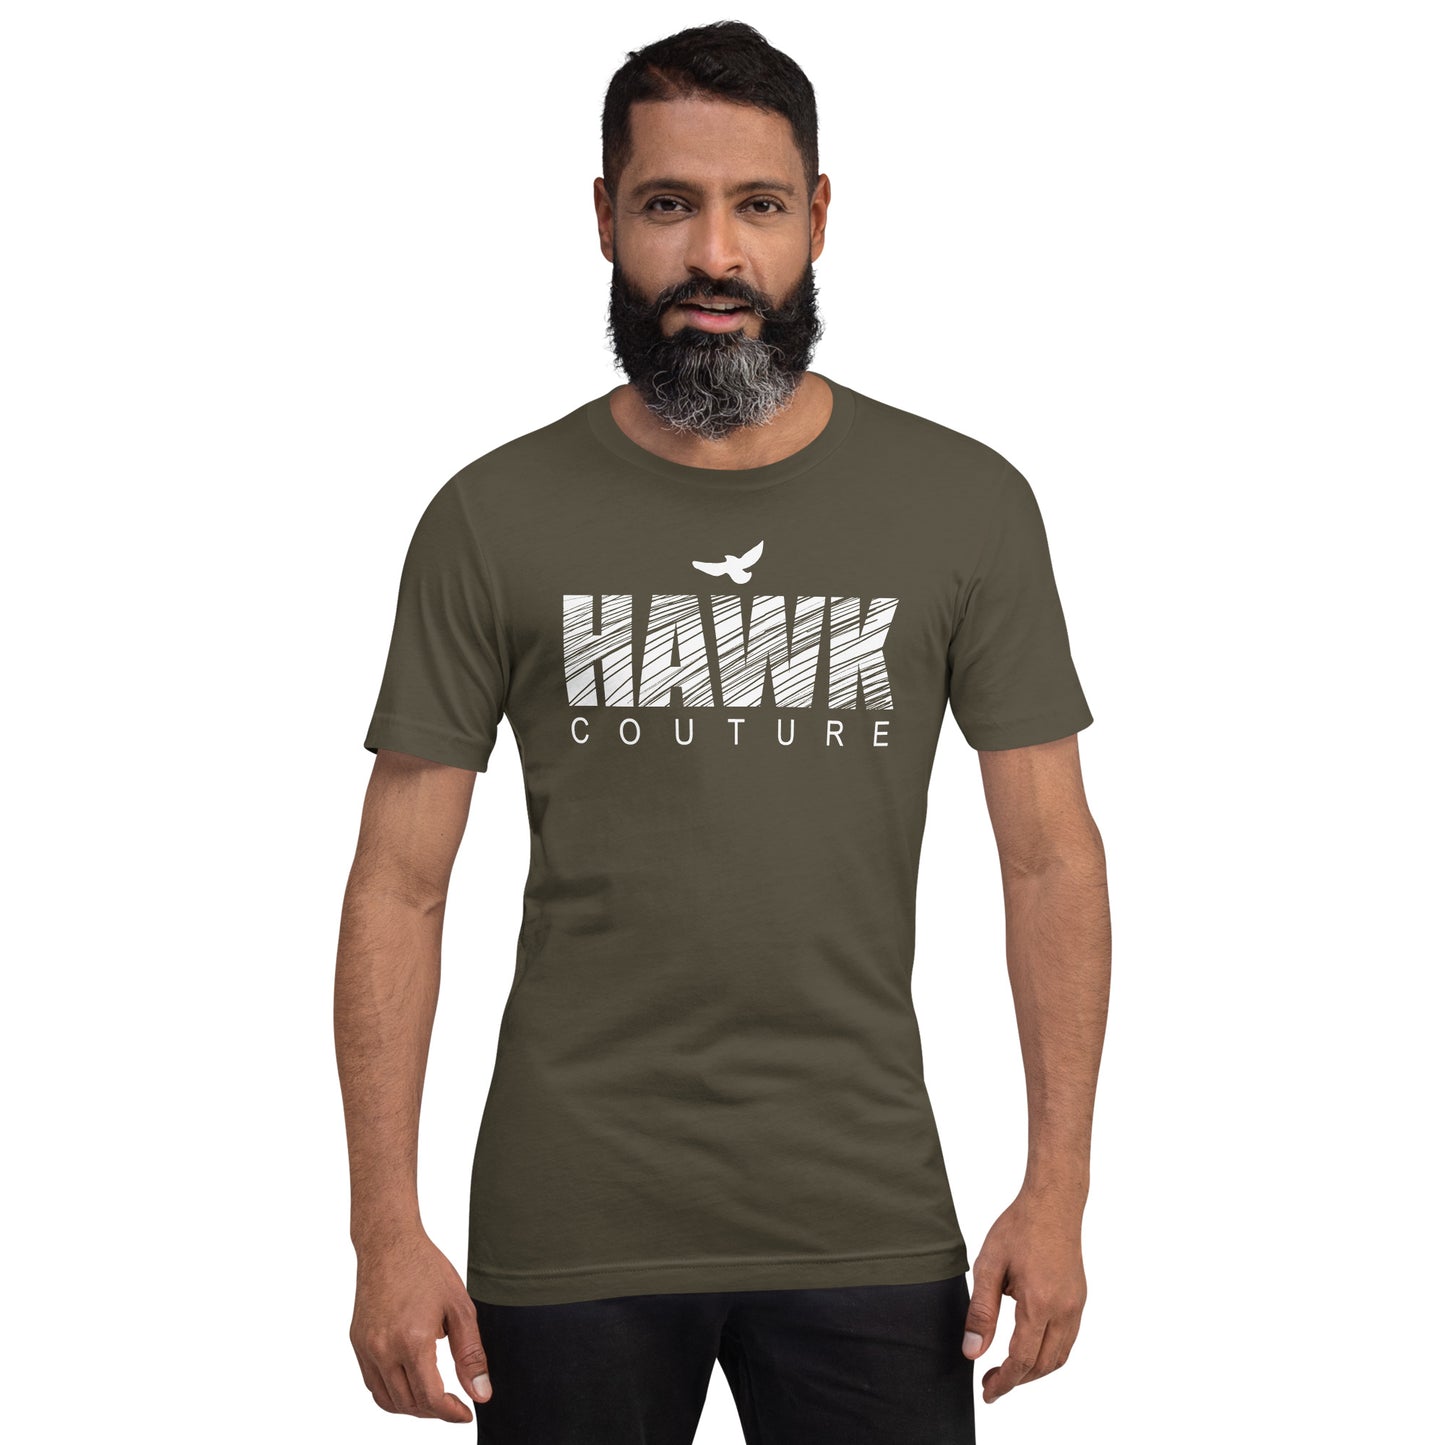 Hawk Couture Bold Type T Shirt - White Font